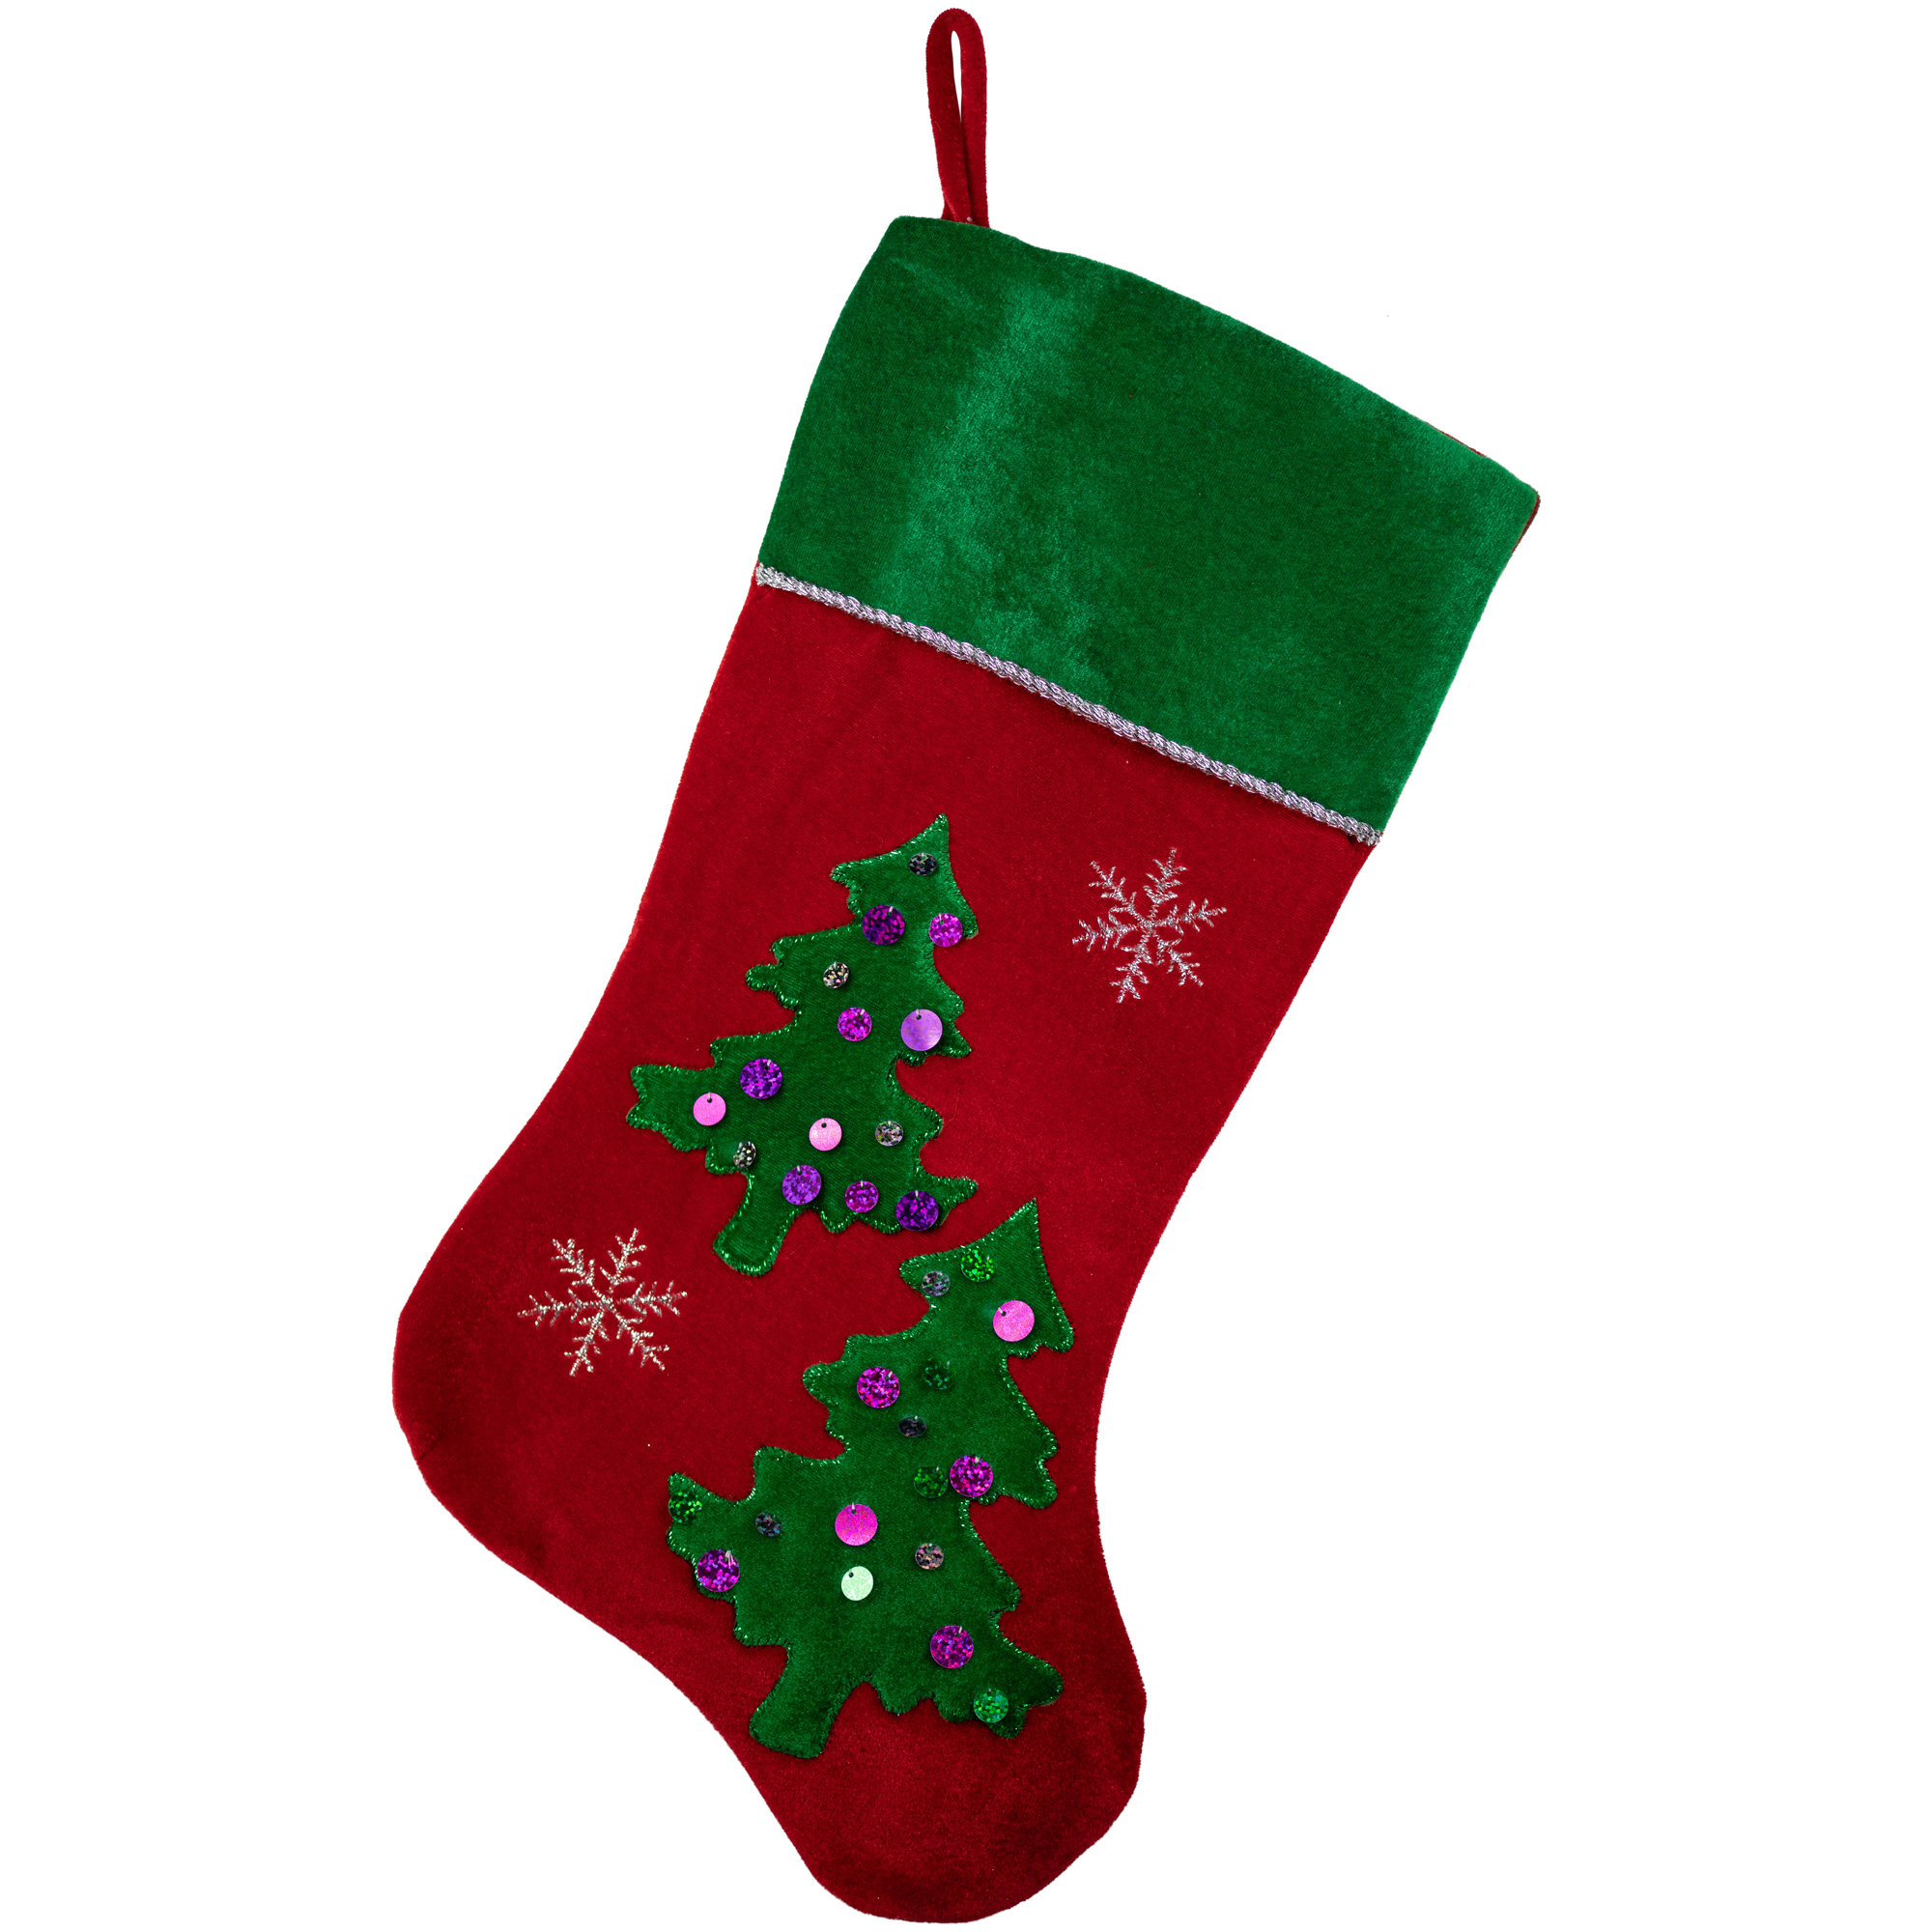 2016 Office Stocking decorating contest  Christmas stocking decorations,  Decorated stockings, Christmas stockings